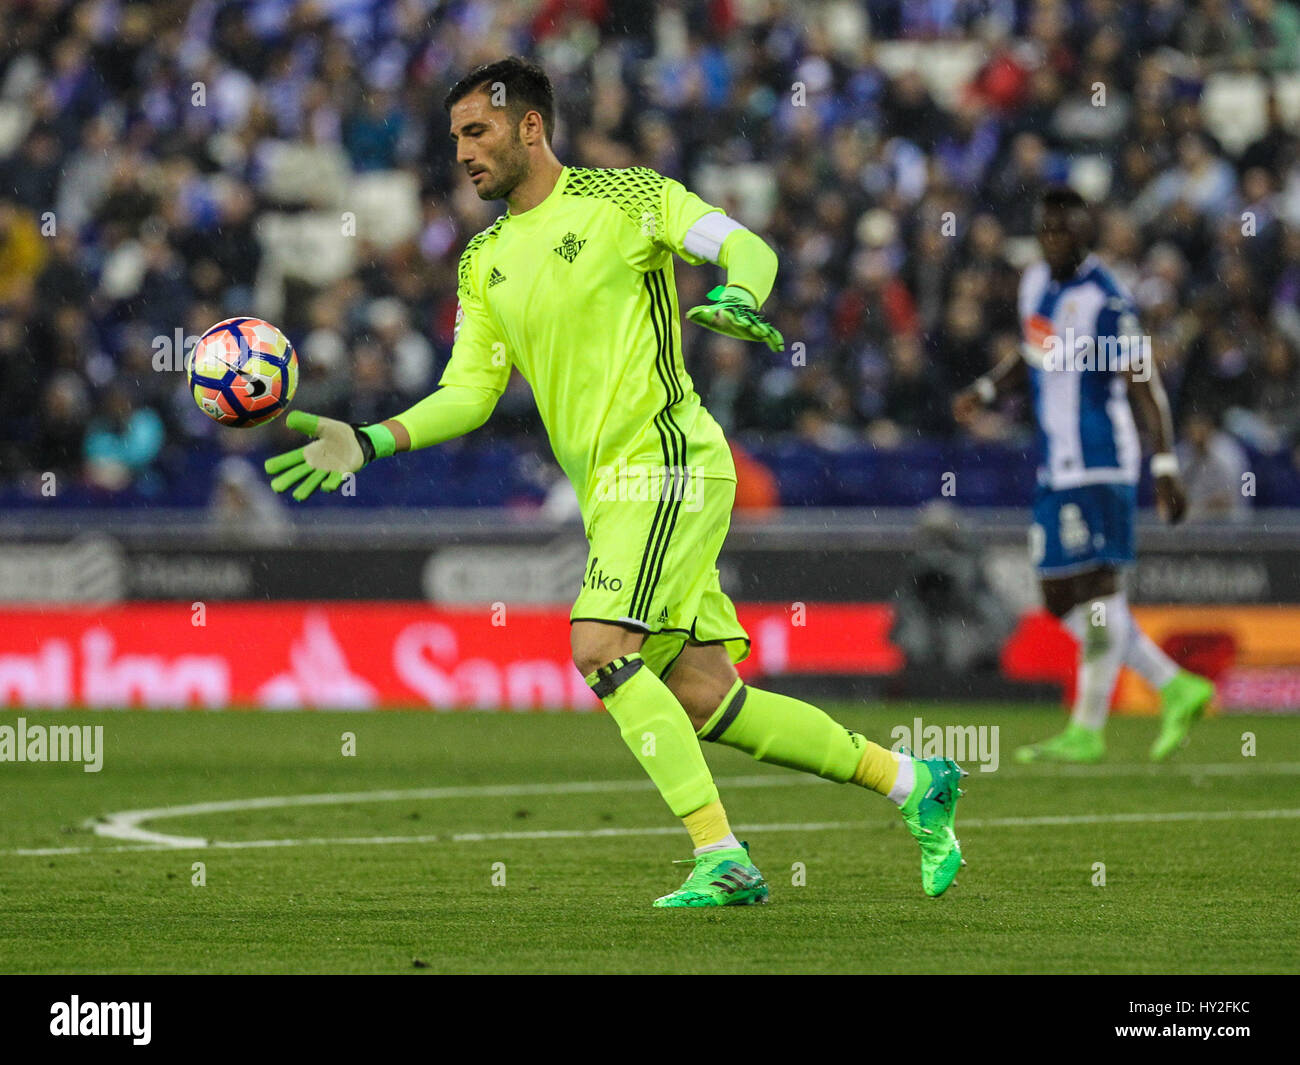 Barcelona, Spain. 31st March, 2017. An action of Adan during the match. Barcelona, march 31, 2017. La Liga Santander match day 29 game between Espanyol de Barcelona and Real Betis de Sevilla played in RDCE Stadium, Barcelona, Spain. Espanyol defeated Betis with two late goals scored by Javi Fuego (87 min) and Reyes (90 min). Ruben Castro scored for Betis (78 min). Photo by Pedro Salado | PHOTO MEDIA EXPRESS Credit: VWPics/Alamy Live News Stock Photo